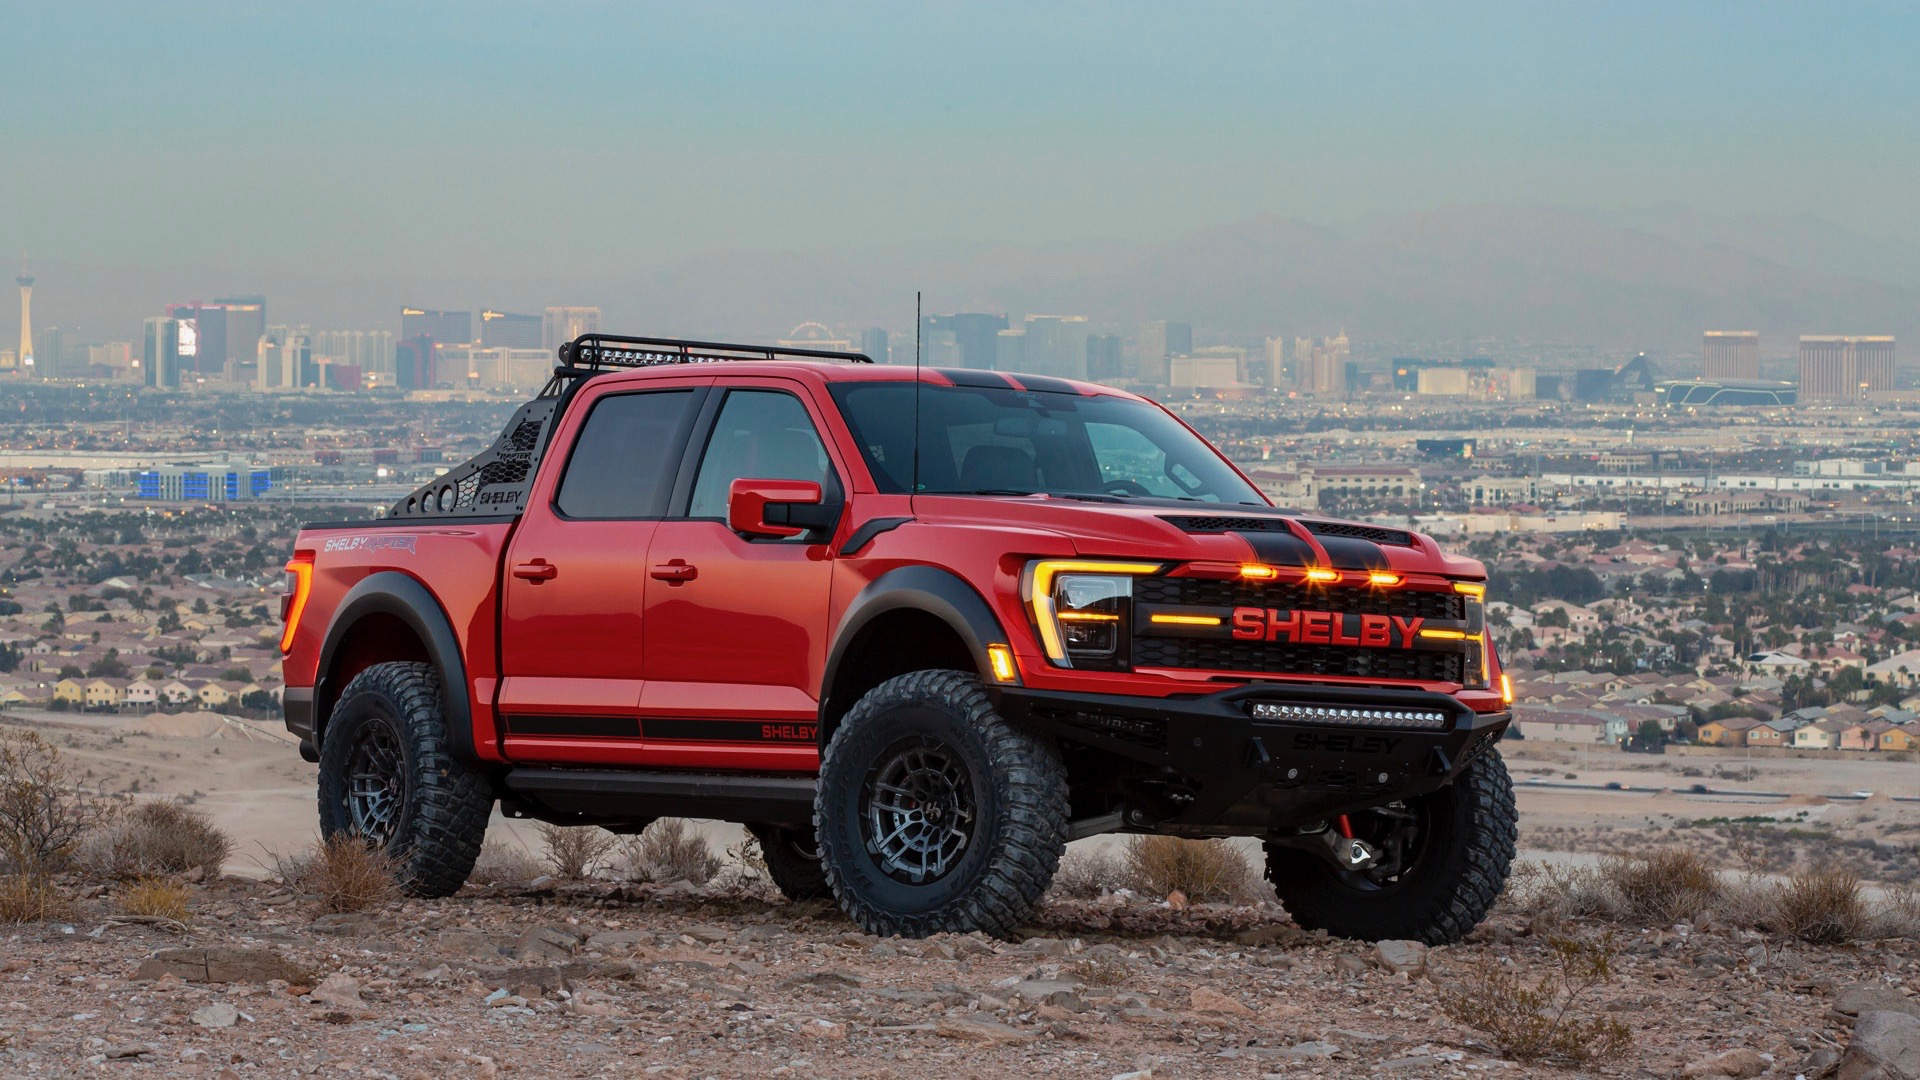 2022 Ford Shelby Raptor arrives with 525 hp and aggression ARKLATEXRIDES